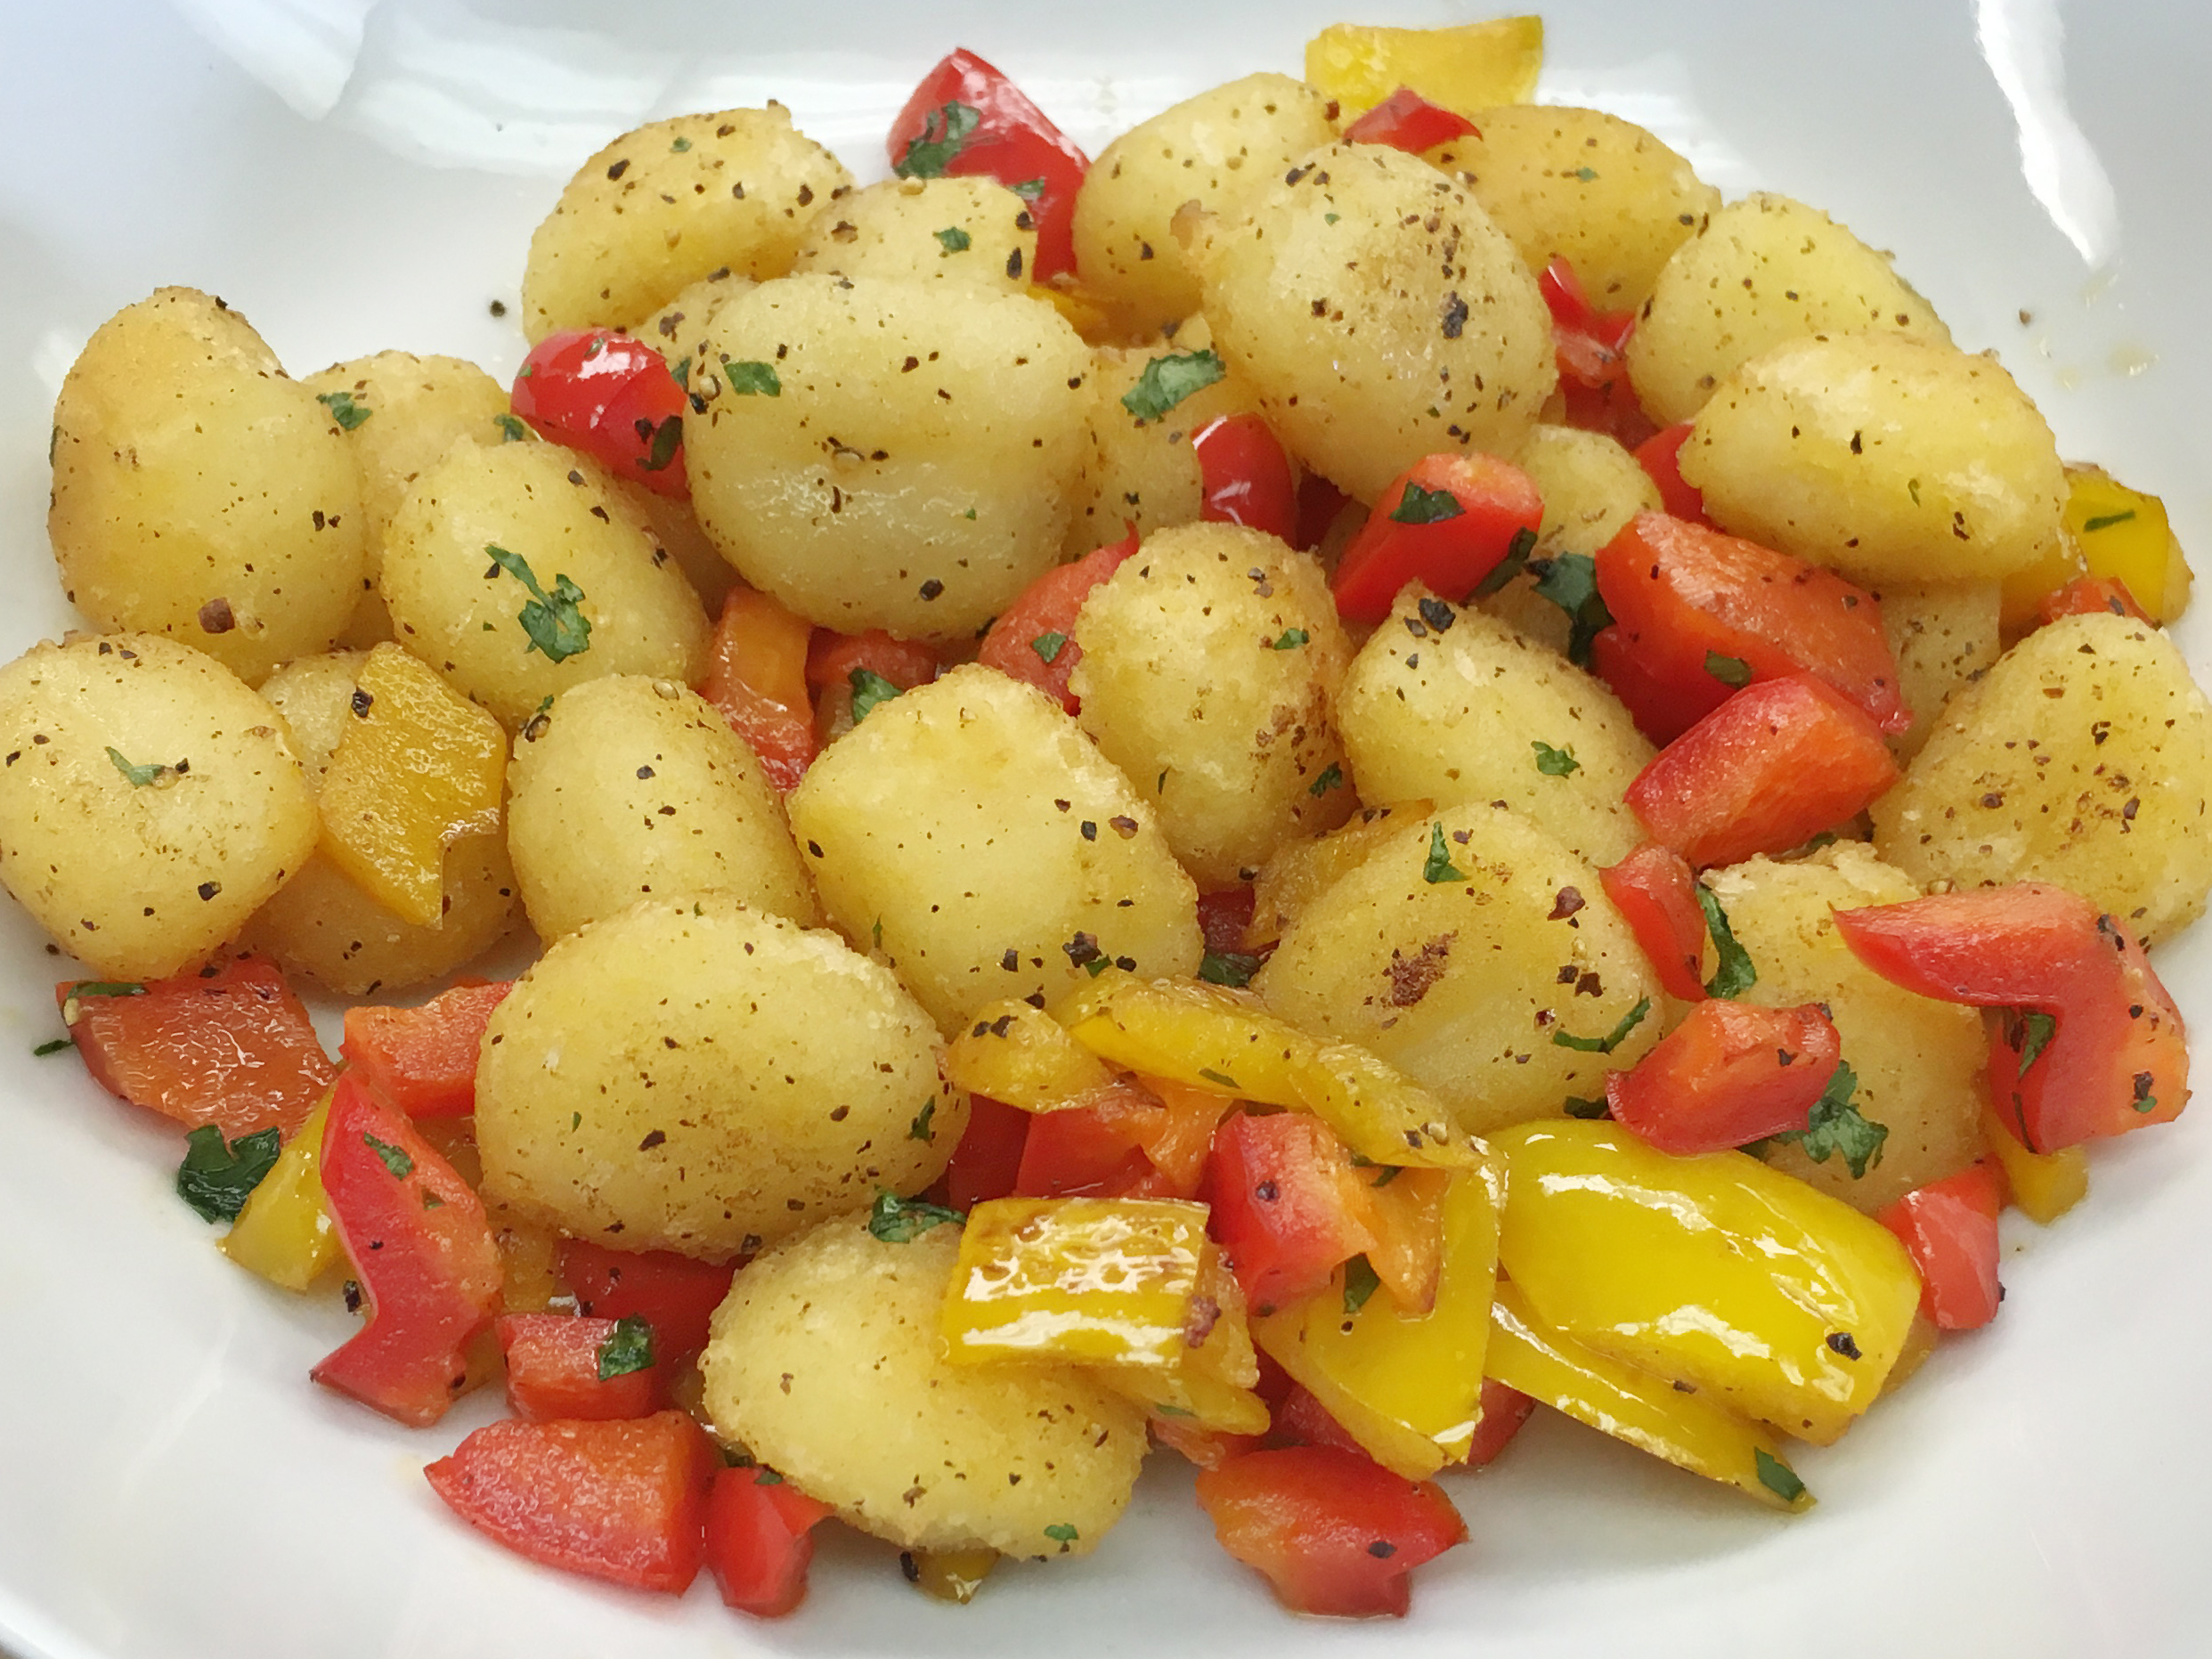 nff-pan-seared-bell-peppers-gnocchi-final